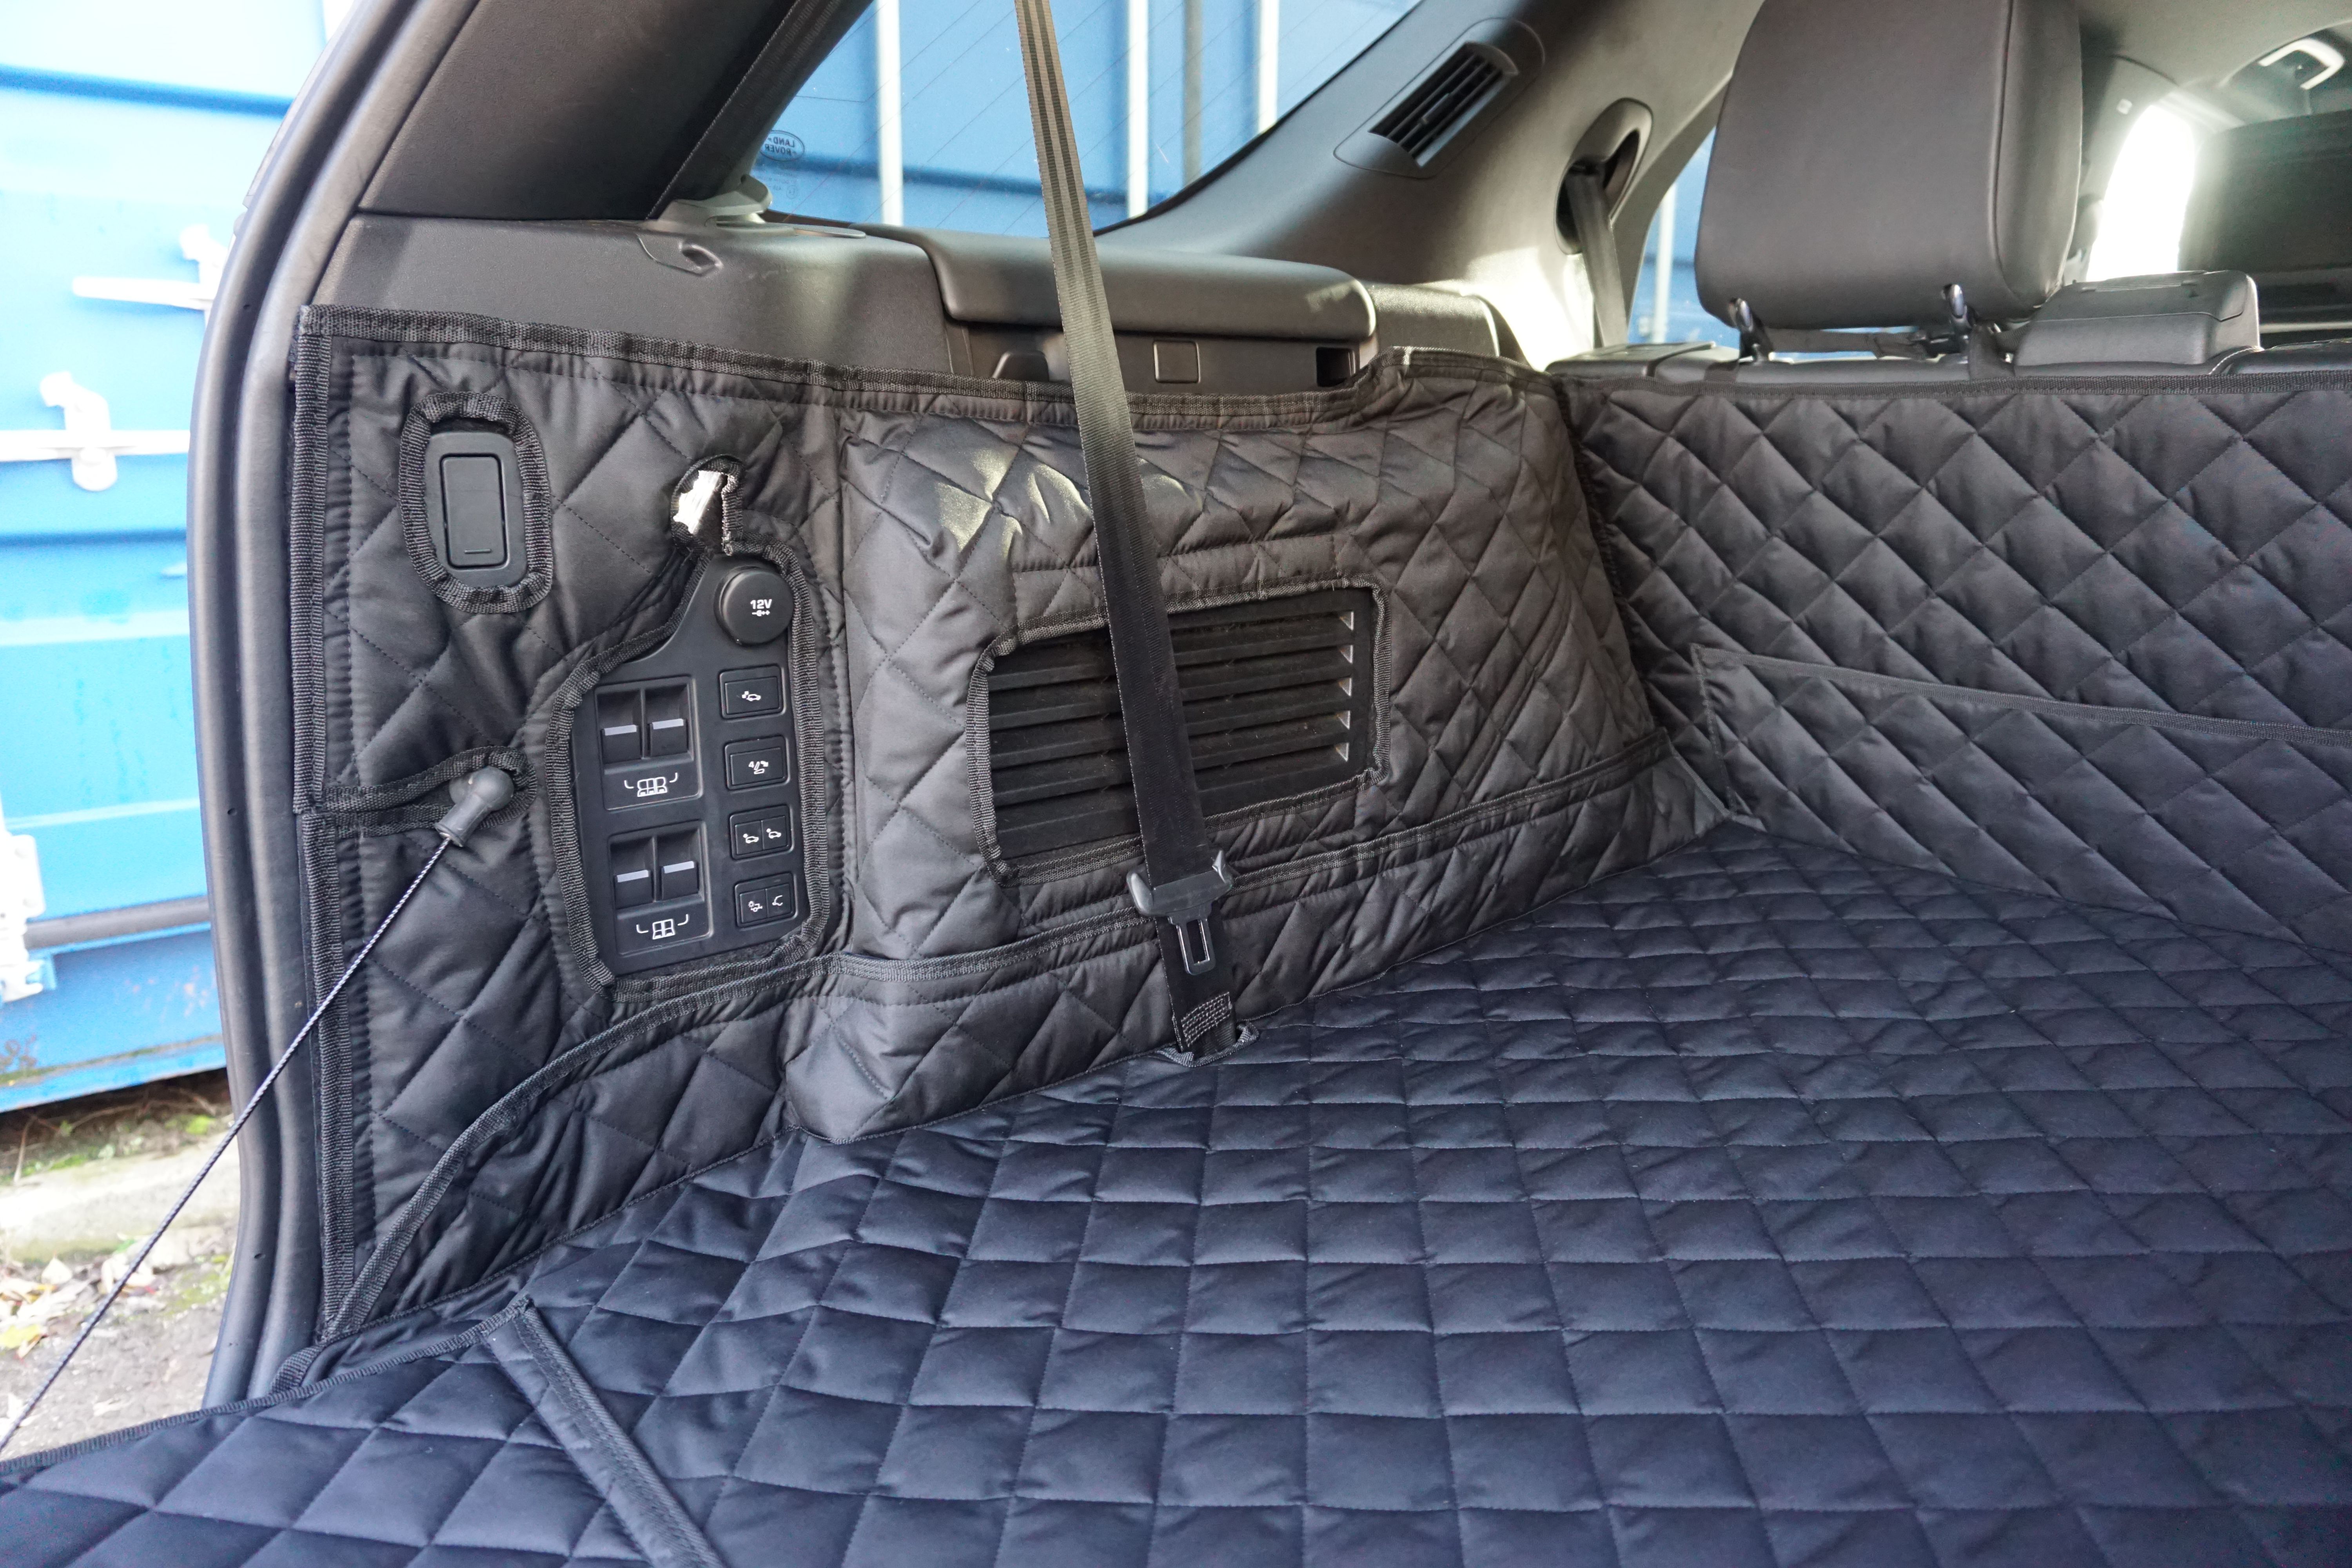 Lexus RXL 450H 7 Seats 2016 4 Piece Fully Tailored Boot Liner Boot Liners